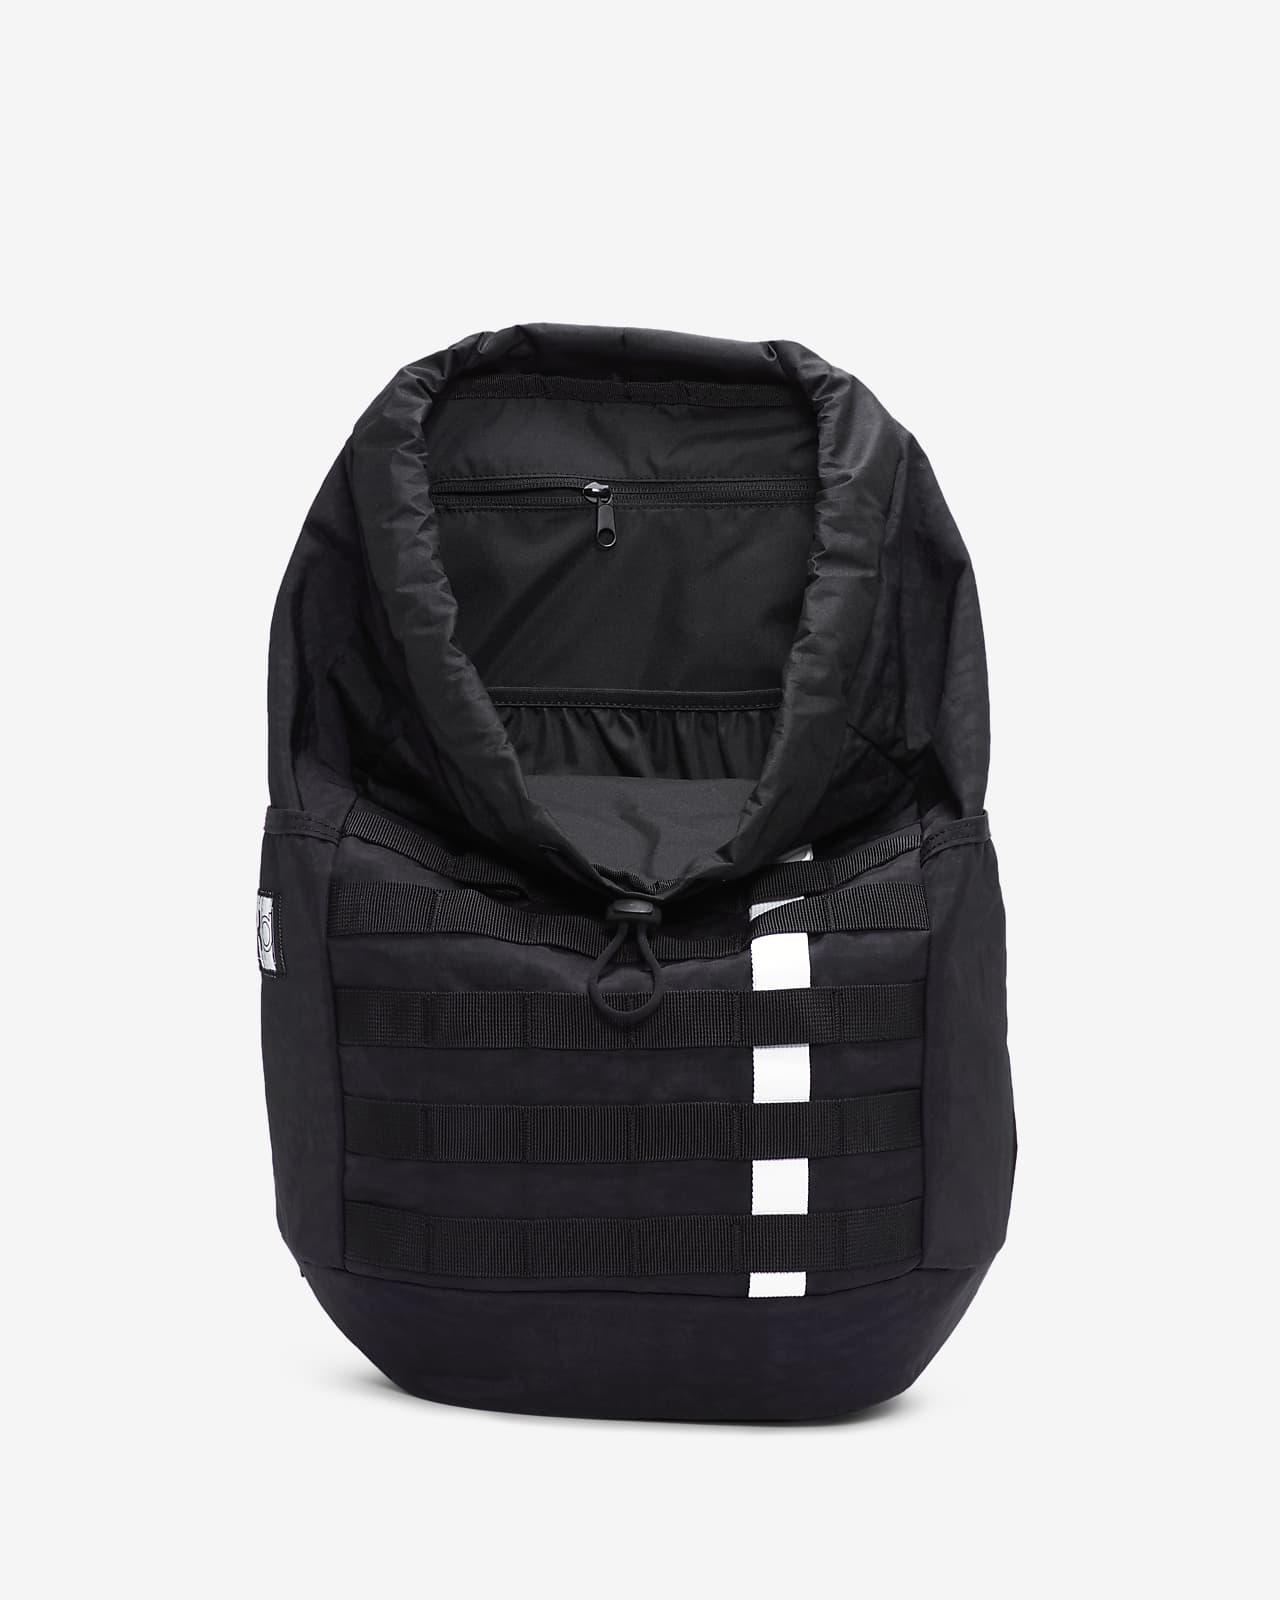 new kd backpack